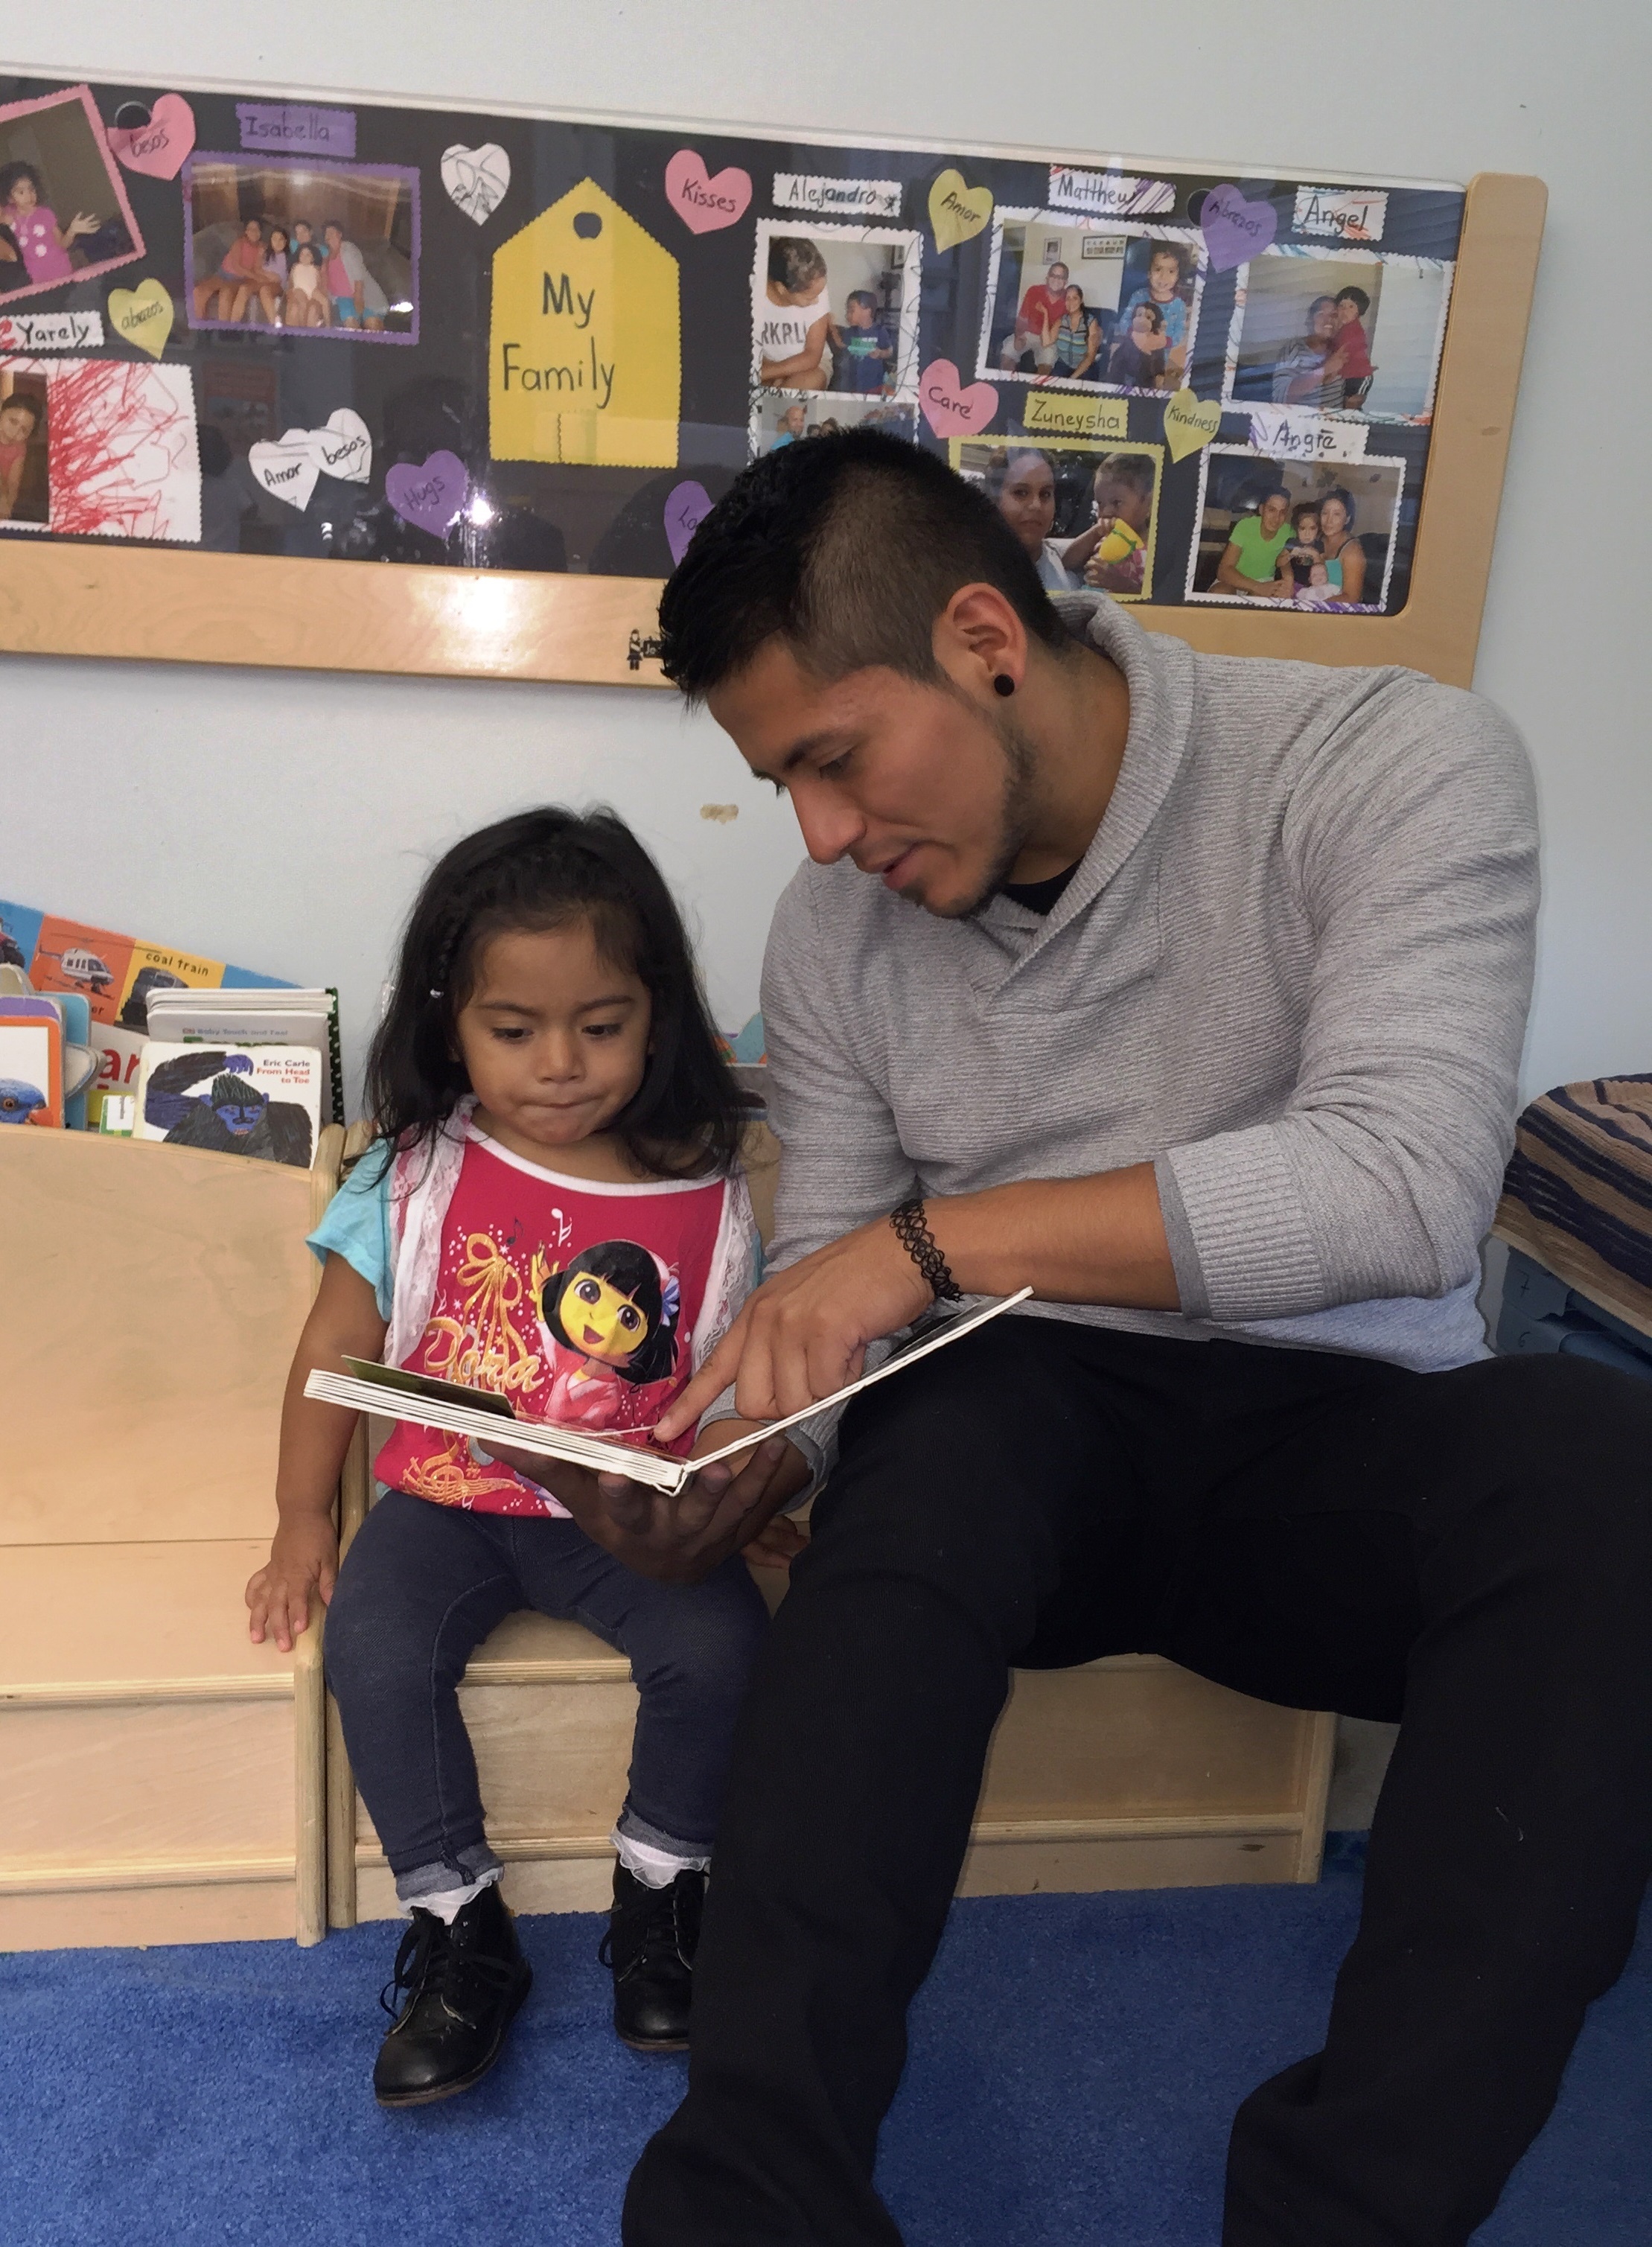 Man reads to child who is wearing a dora the explorer shirt